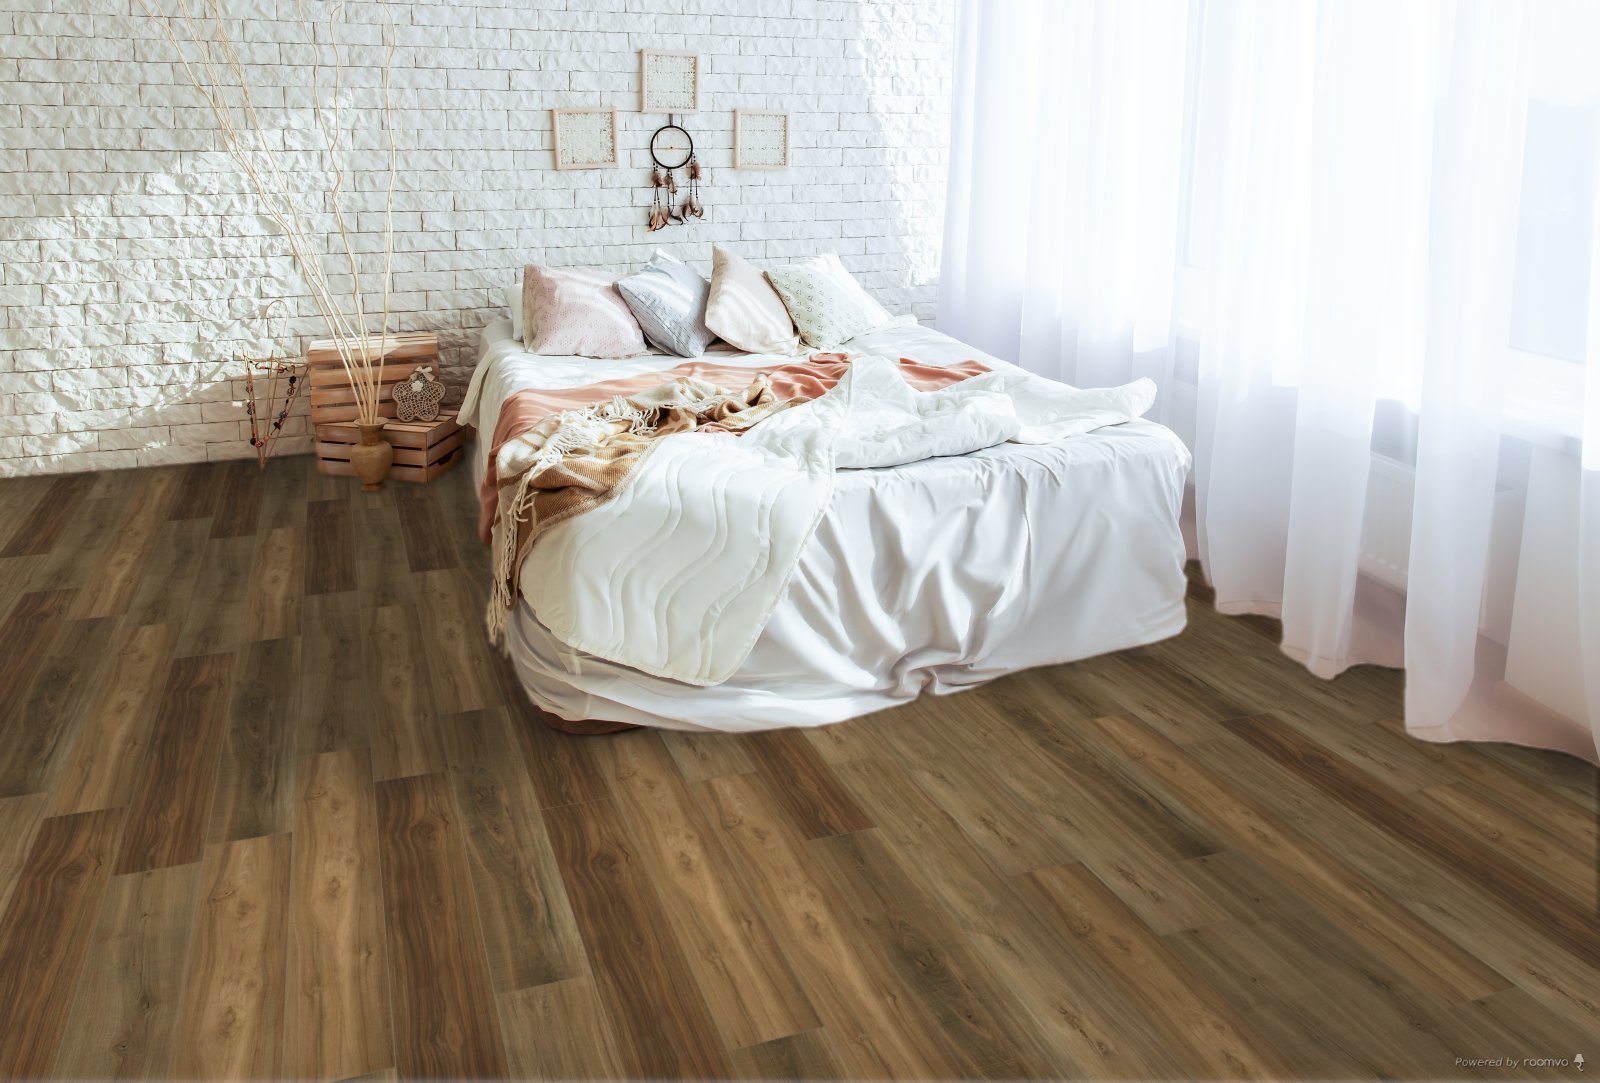 Horizen Flooring presents to you a picture of a quality wide plank Haw River luxury vinyl plank. NovoCore Premium EIR collection features a wide range of colors & designs that will compliment any interior. Natural wood grain synchronized surface allow for an authentic hardwood look & feel. This collection features a 0.25″ / 6.5 mm overall thickness and a durable 22 mil / 0.55 mm wear layer for residential and commercial applications.